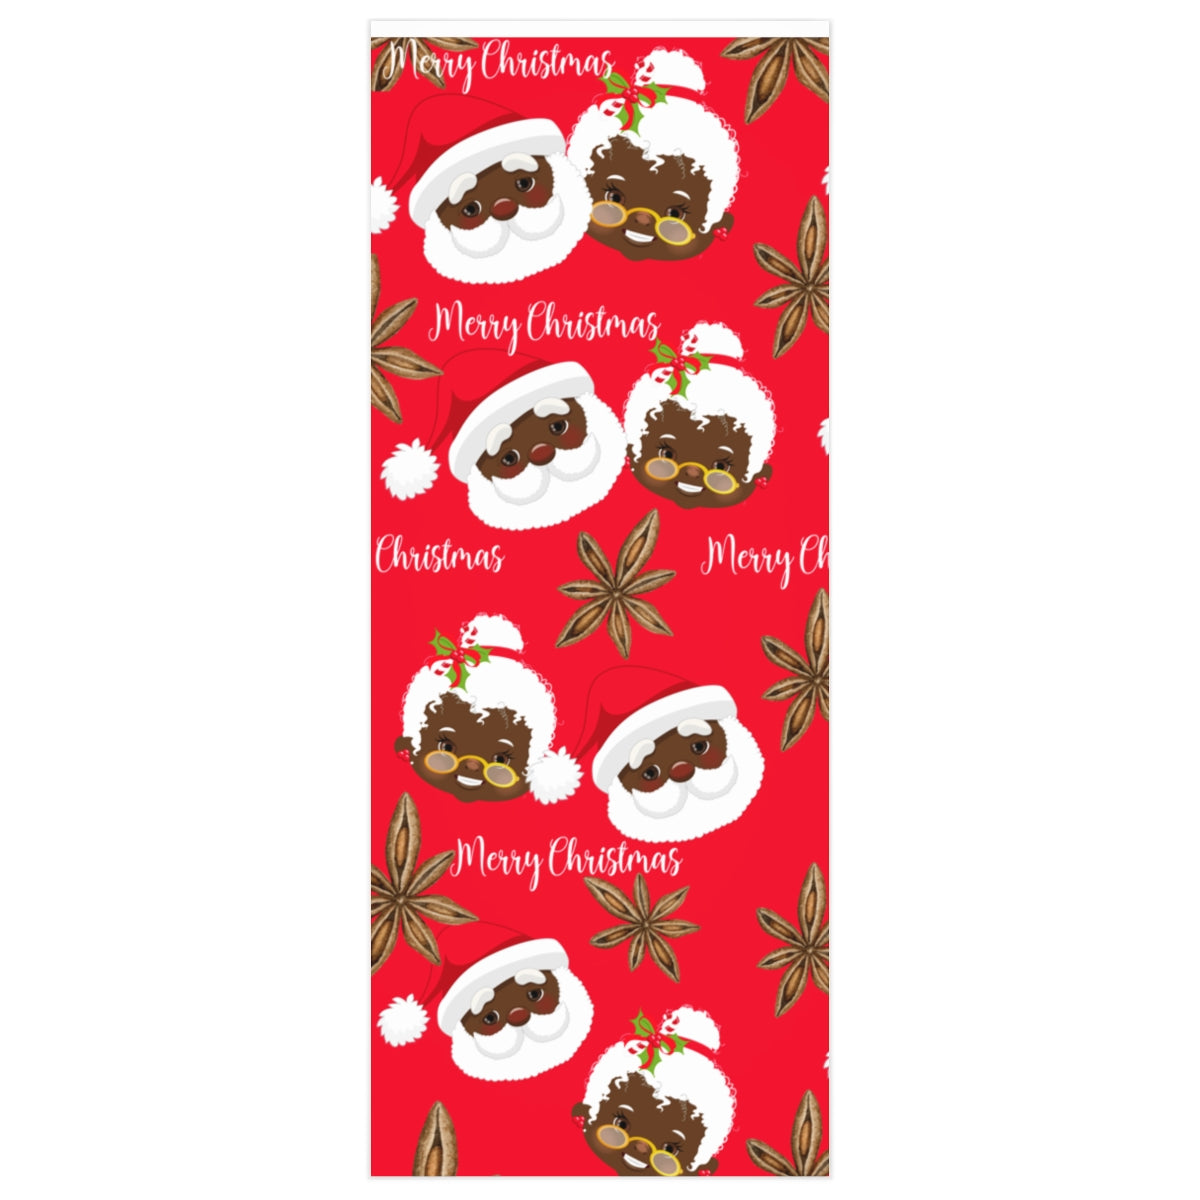 Mr and Mrs Clifford Claus Wrapping Paper